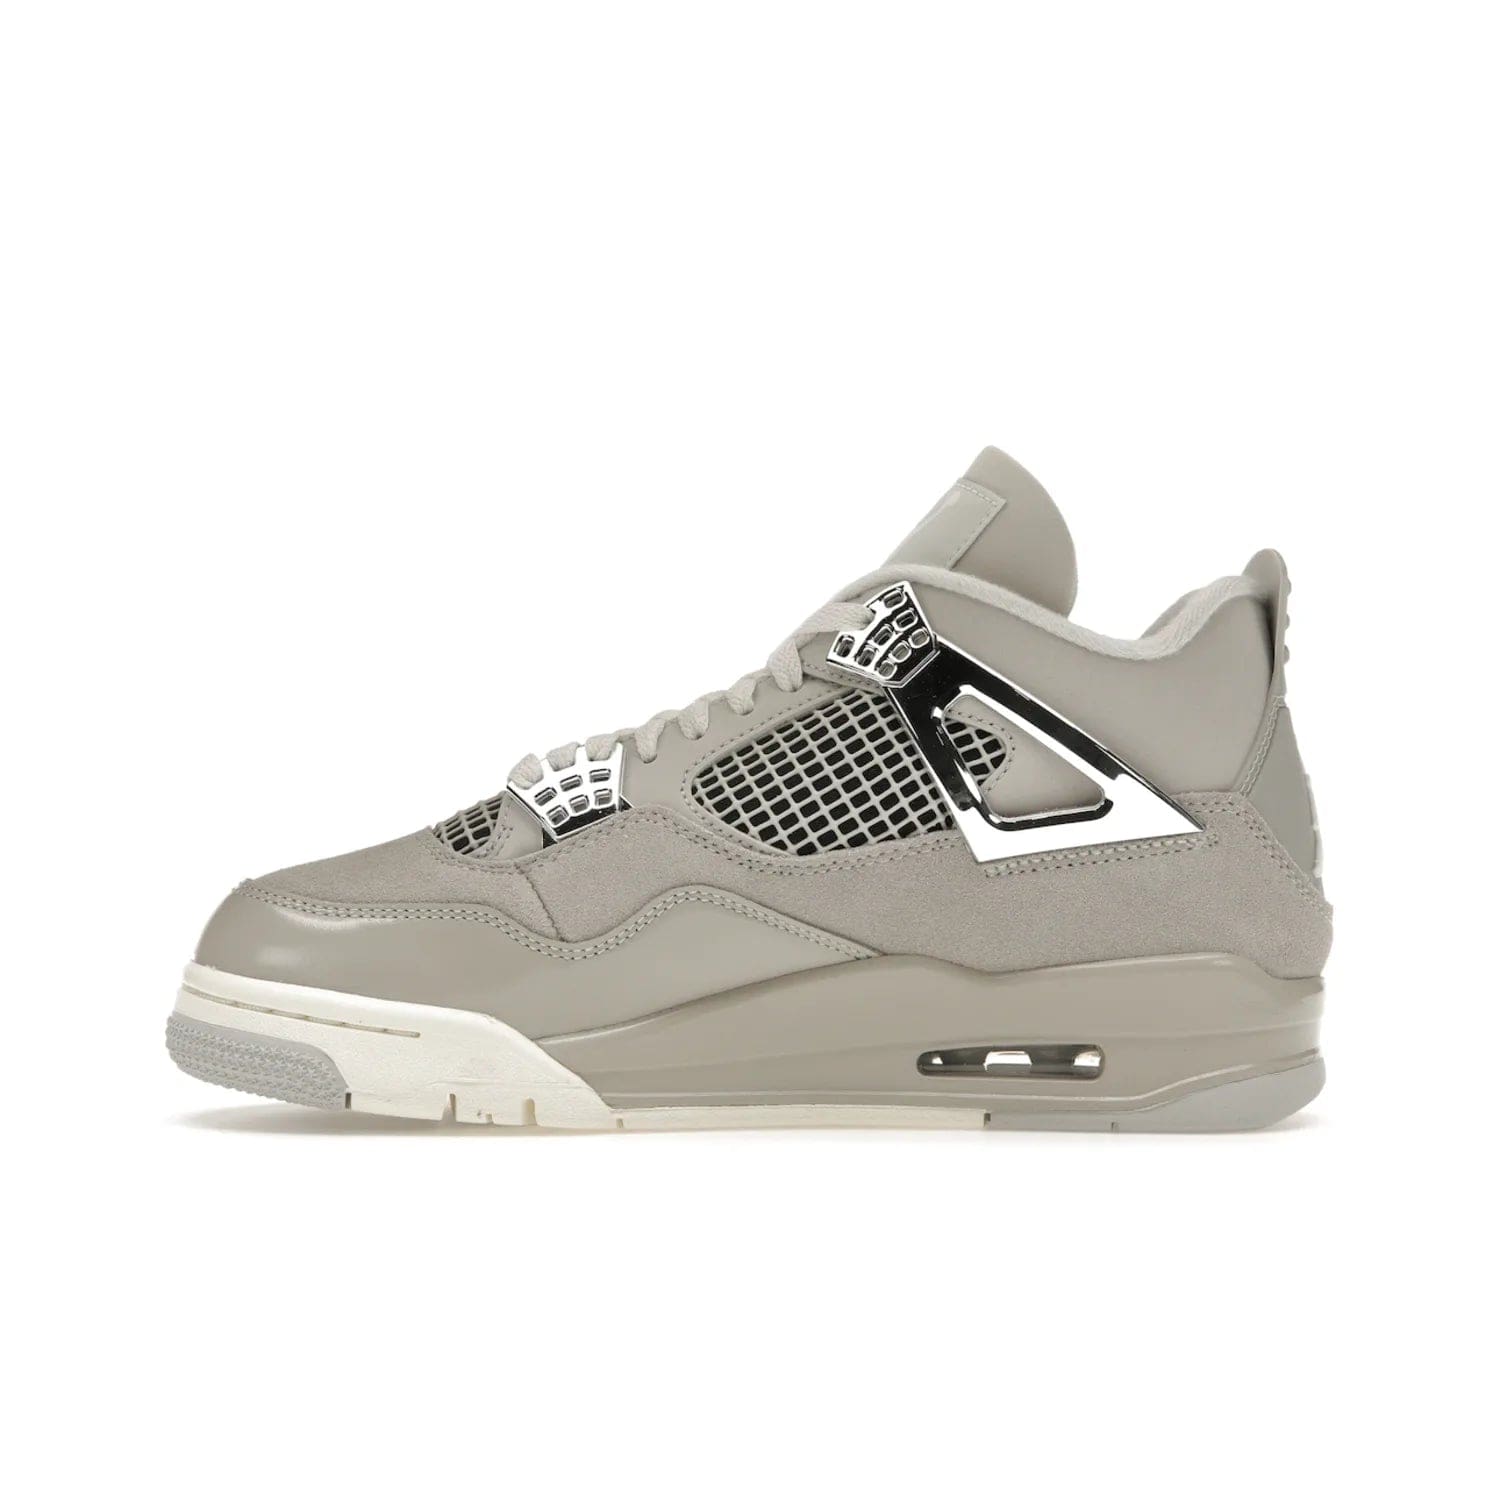 Jordan 4 Retro Frozen Moments (Women's) - Image 19 - Only at www.BallersClubKickz.com - The Jordan 4 Retro Frozen Moments is a stylish blend of classic design elements and modern tones. Featuring suede and leather overlays in a light iron-ore, sail, neutral grey, black, and metallic silver colorway. Get this iconic high-performance sneaker for $210.